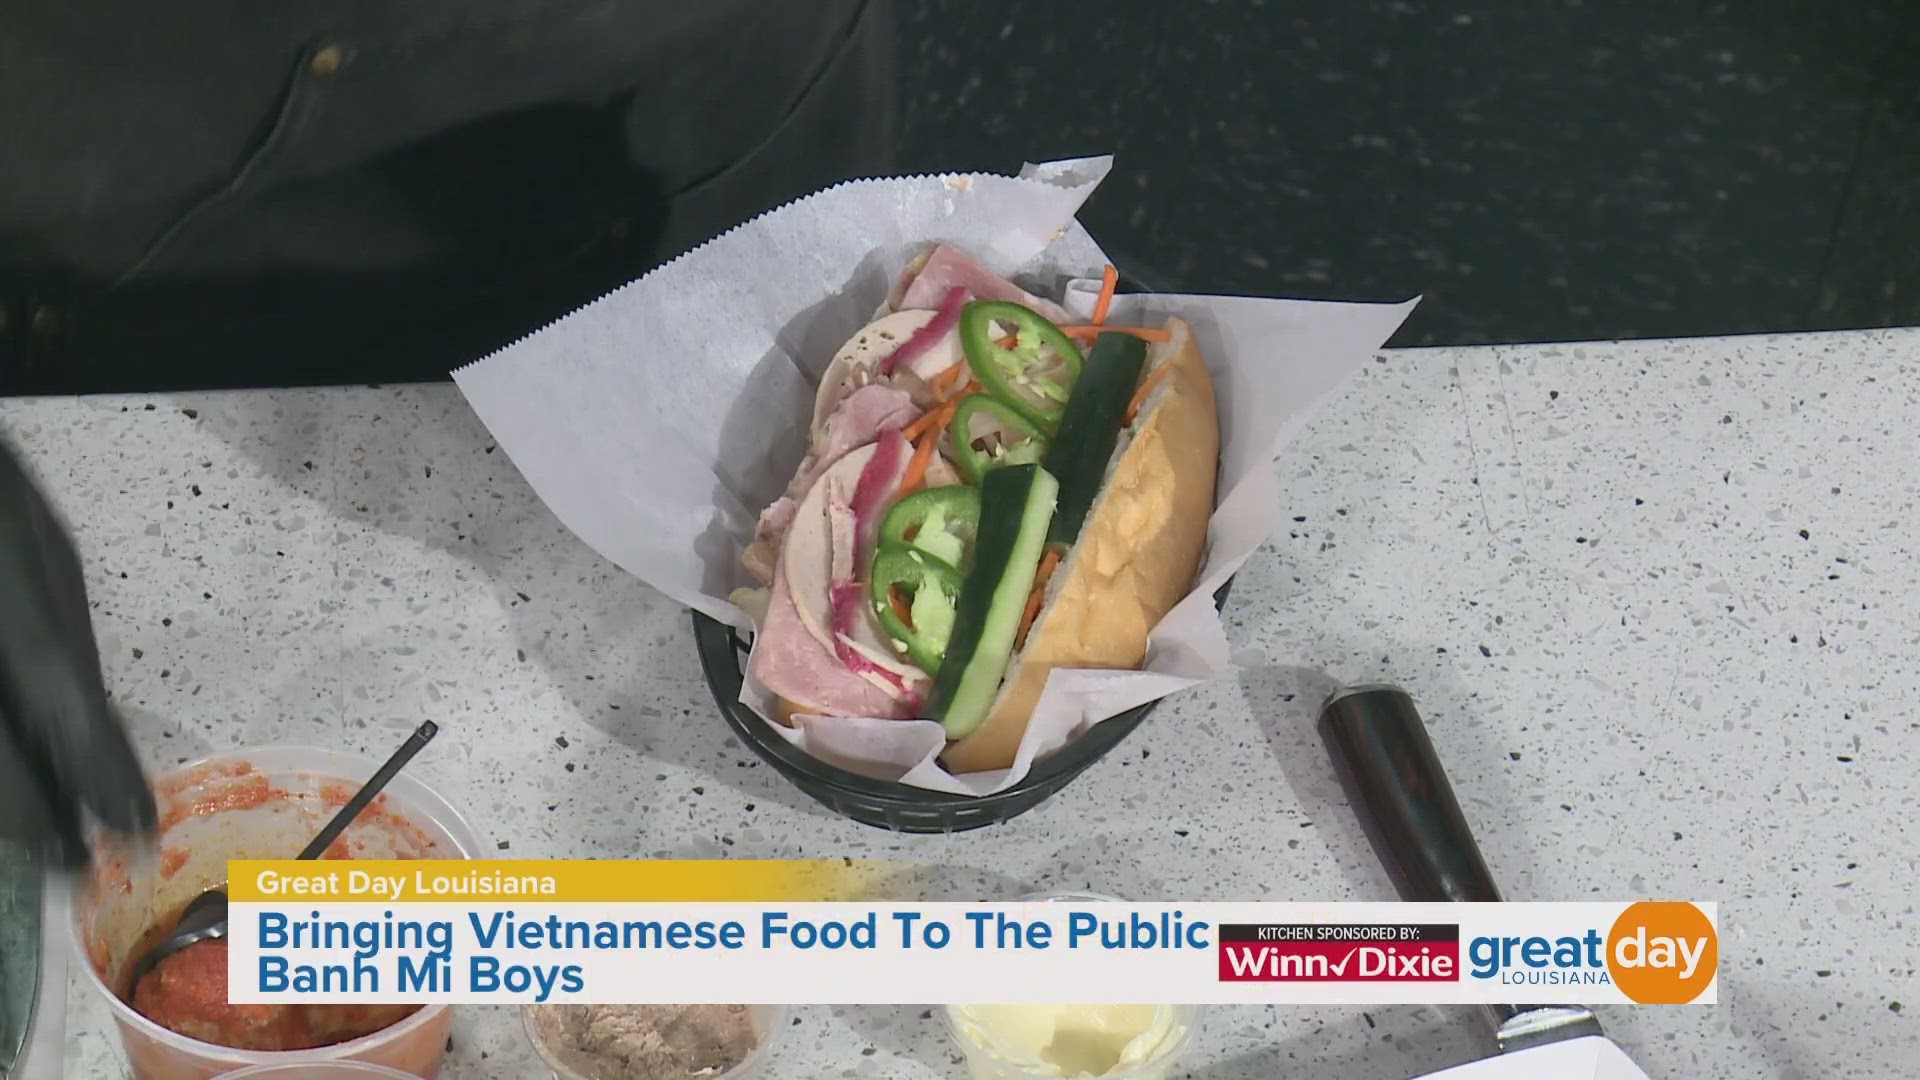 We check out the way they are mixing up the traditional Banh Mi at Banh Mi Boys.